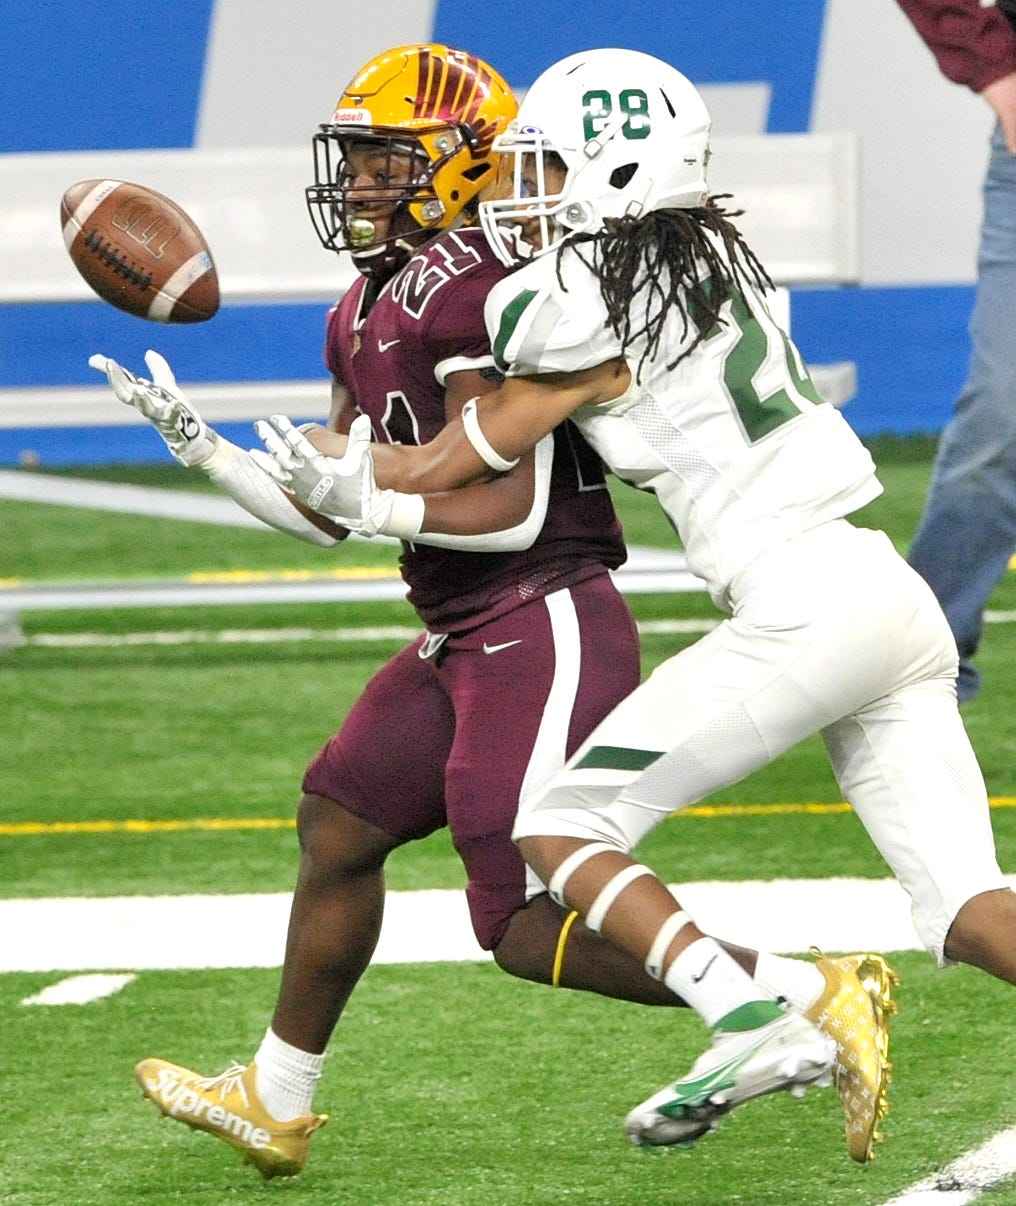 Davison's Jay'len Flowers (21) can't find the handle as he's covered by West Bloomfield's Travis Barnes (29) near the end of the fourth quarter during the MHSAA Division 1 finals at Ford Field on Saturday, January 23, 2021.